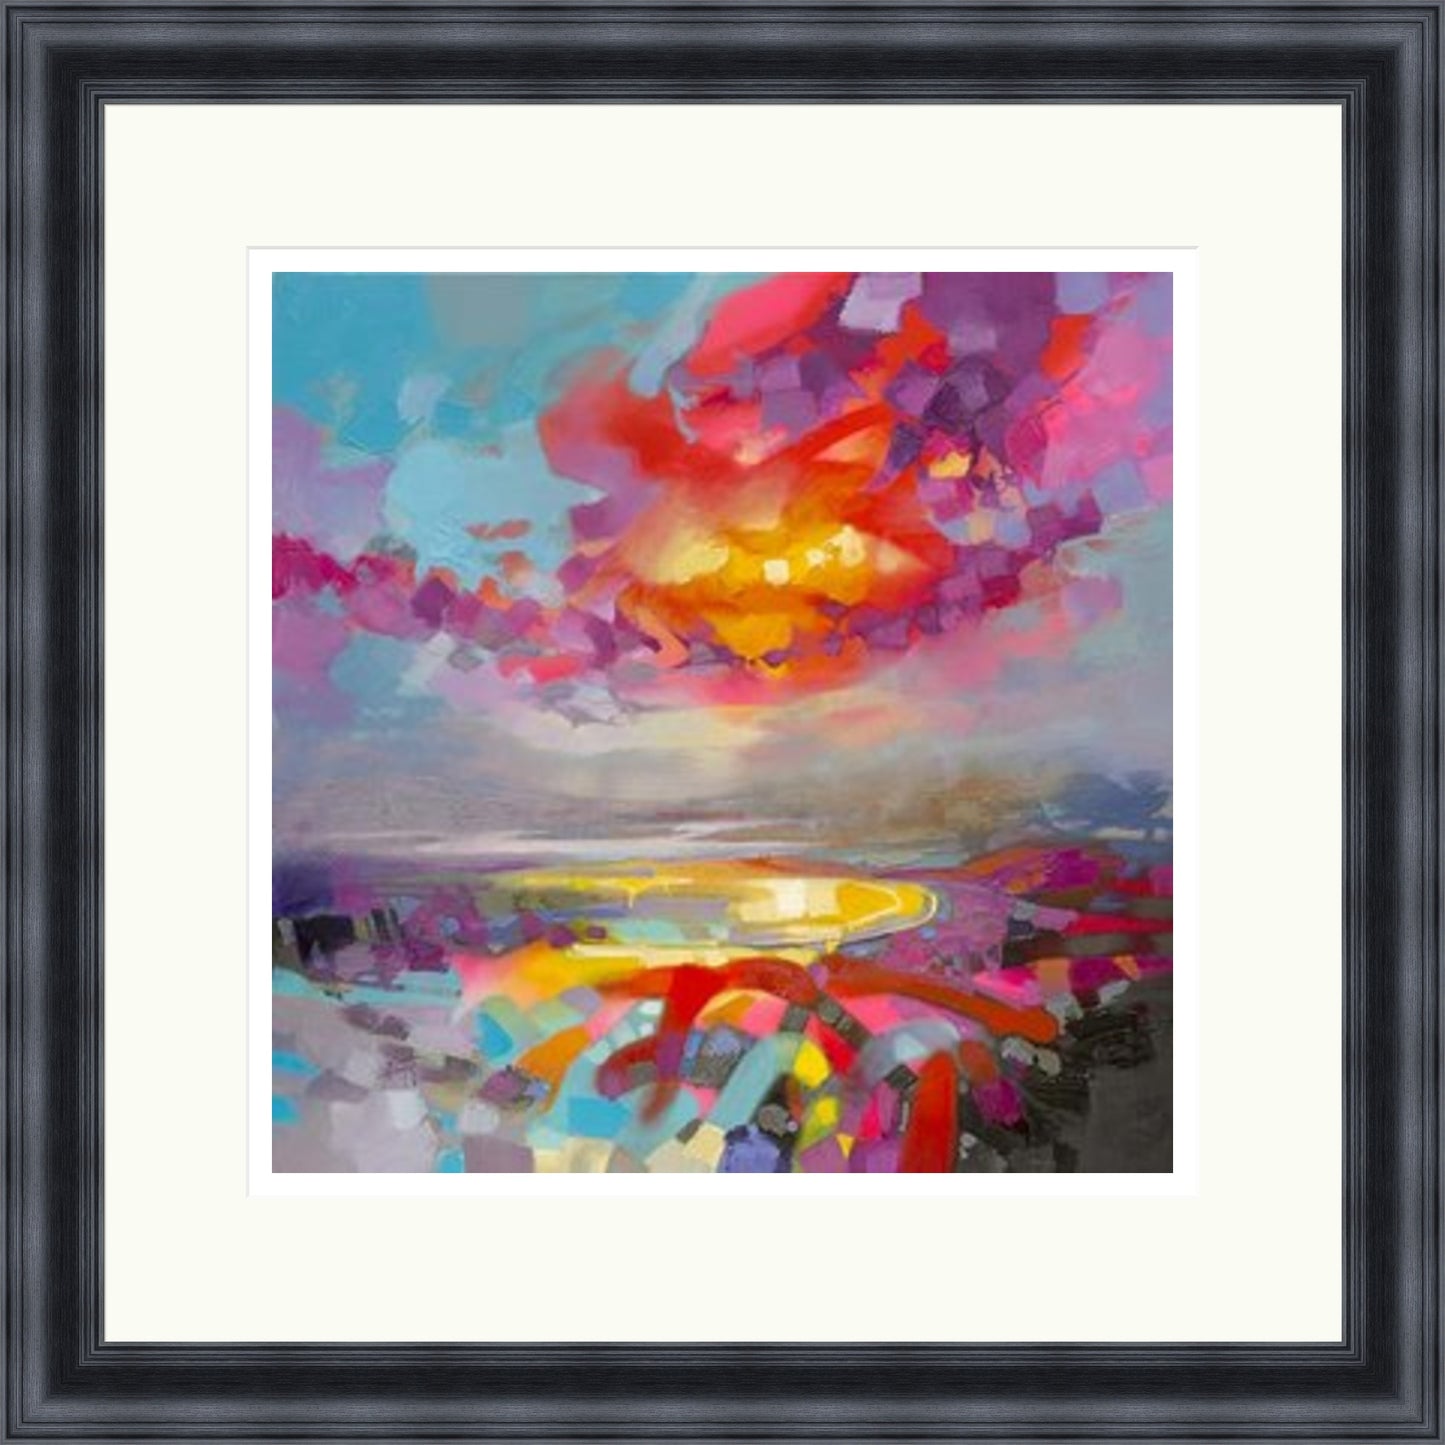 Nucleus (Limited Edition) by Scott Naismith